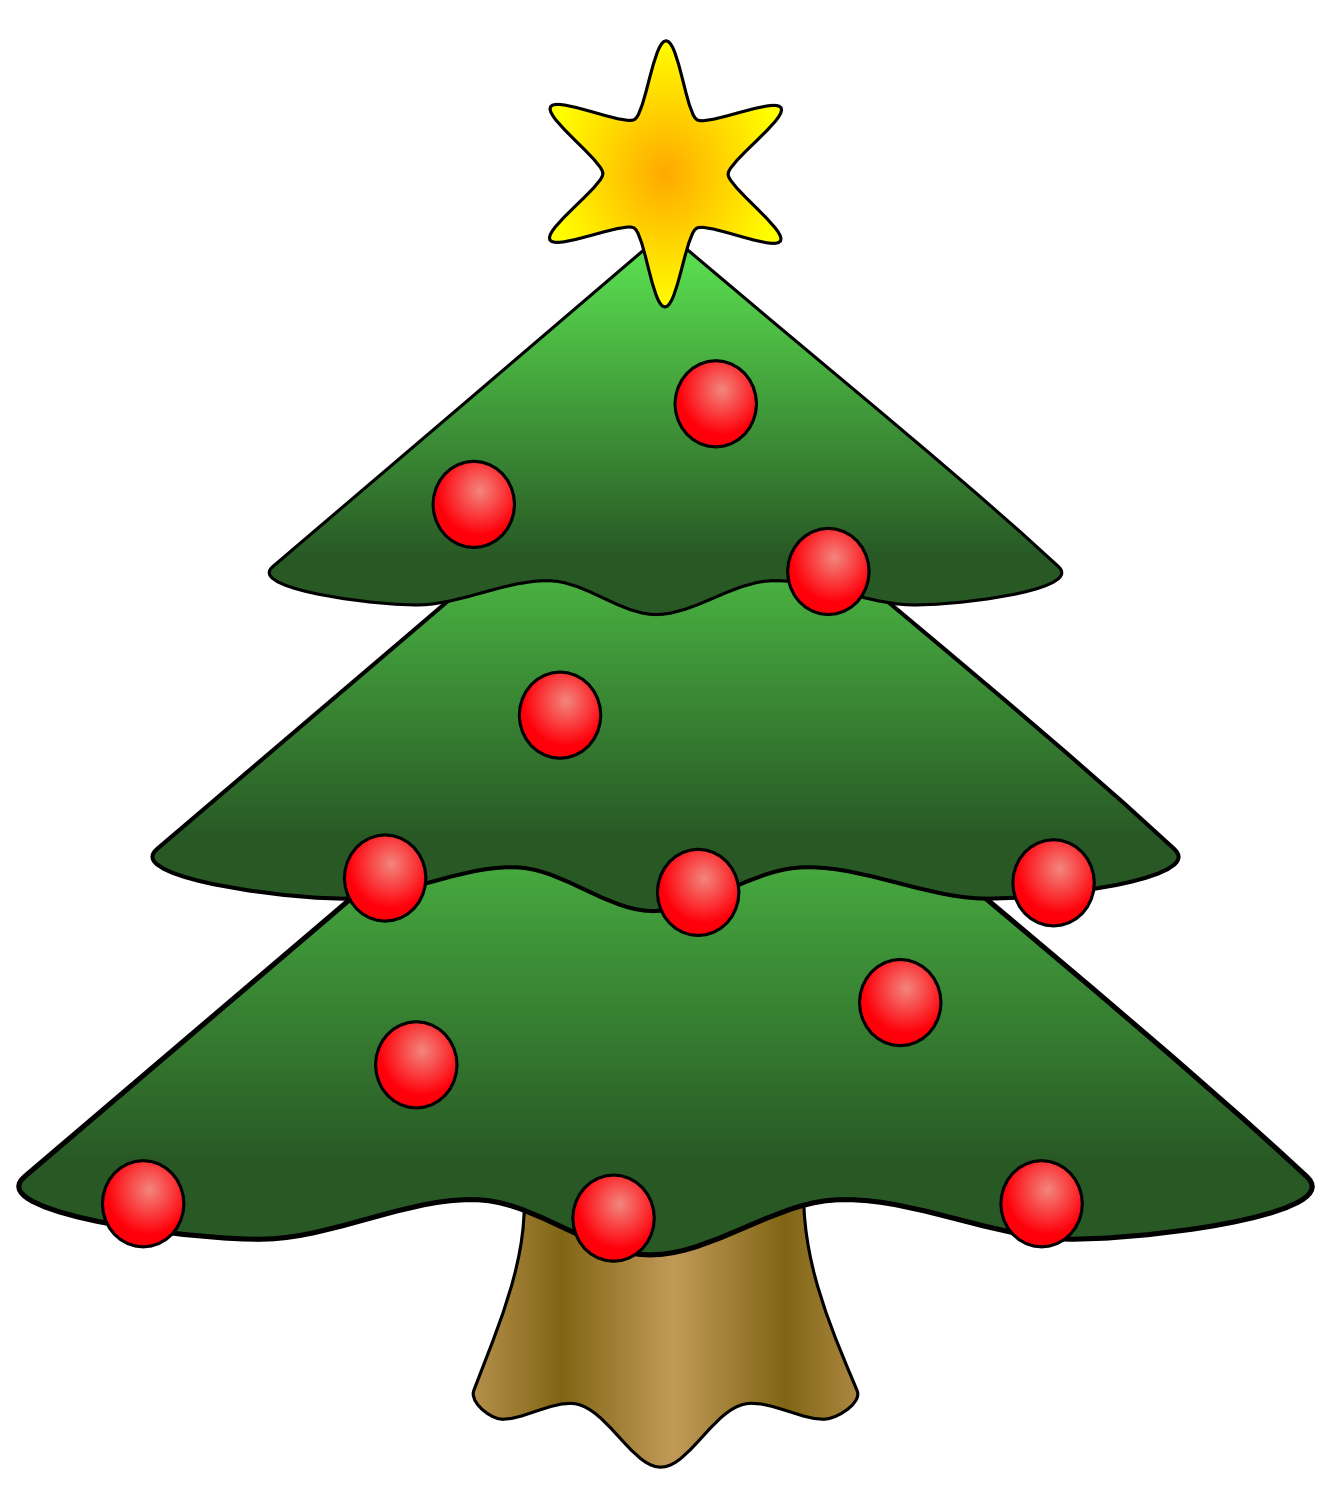 Evergreen Trees Clipart - ClipArt Best